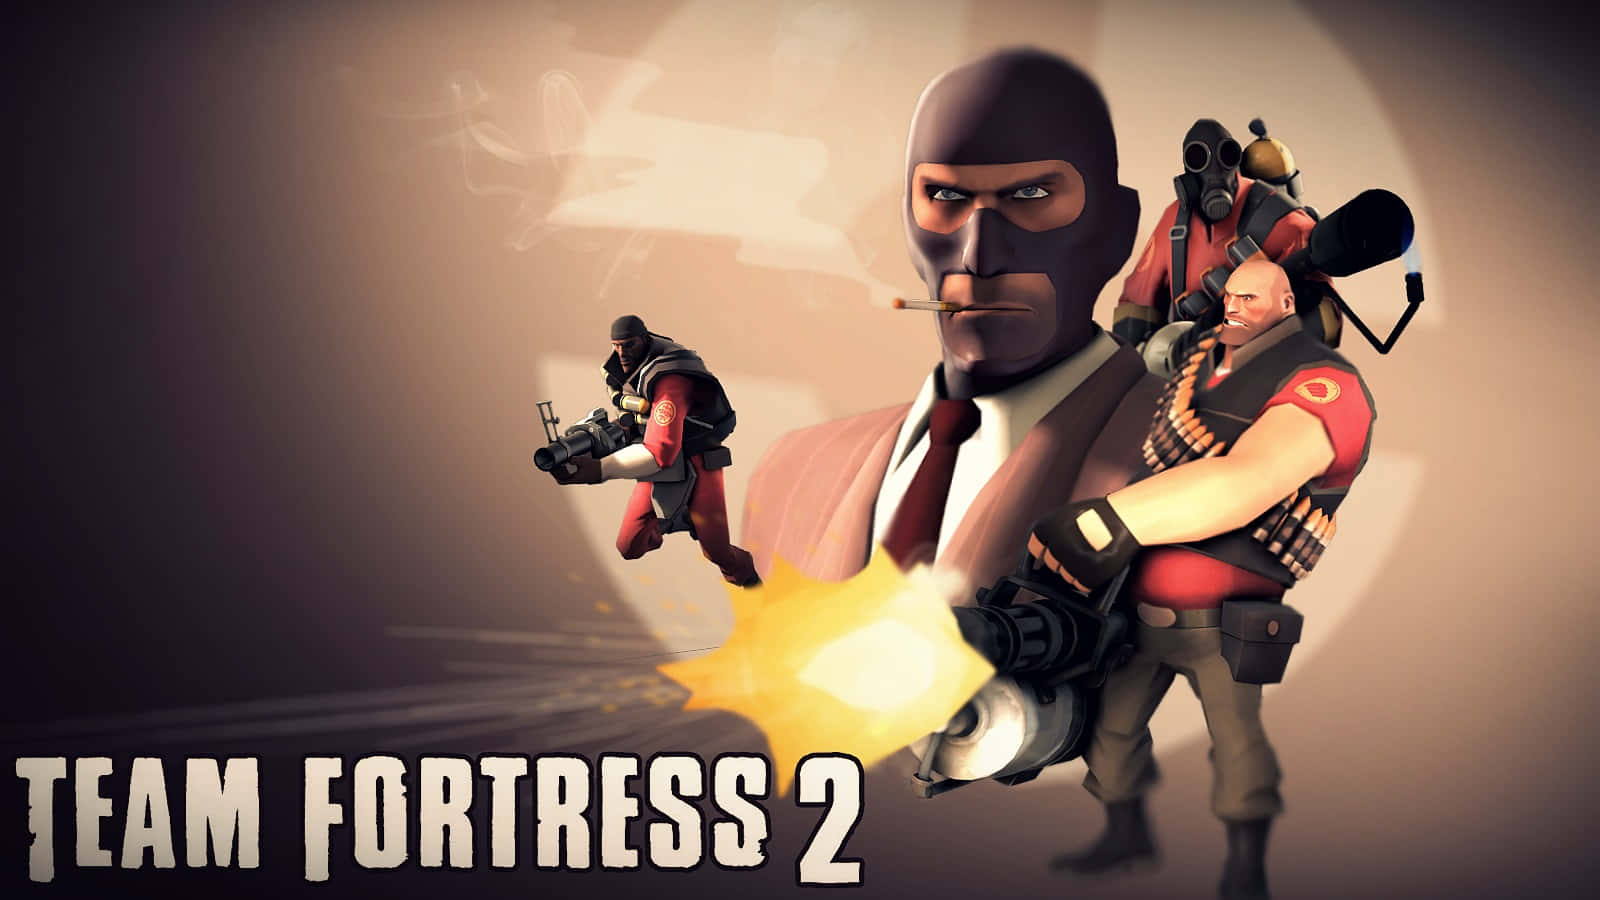 Meet the Team Fortress 2 Characters! Wallpaper